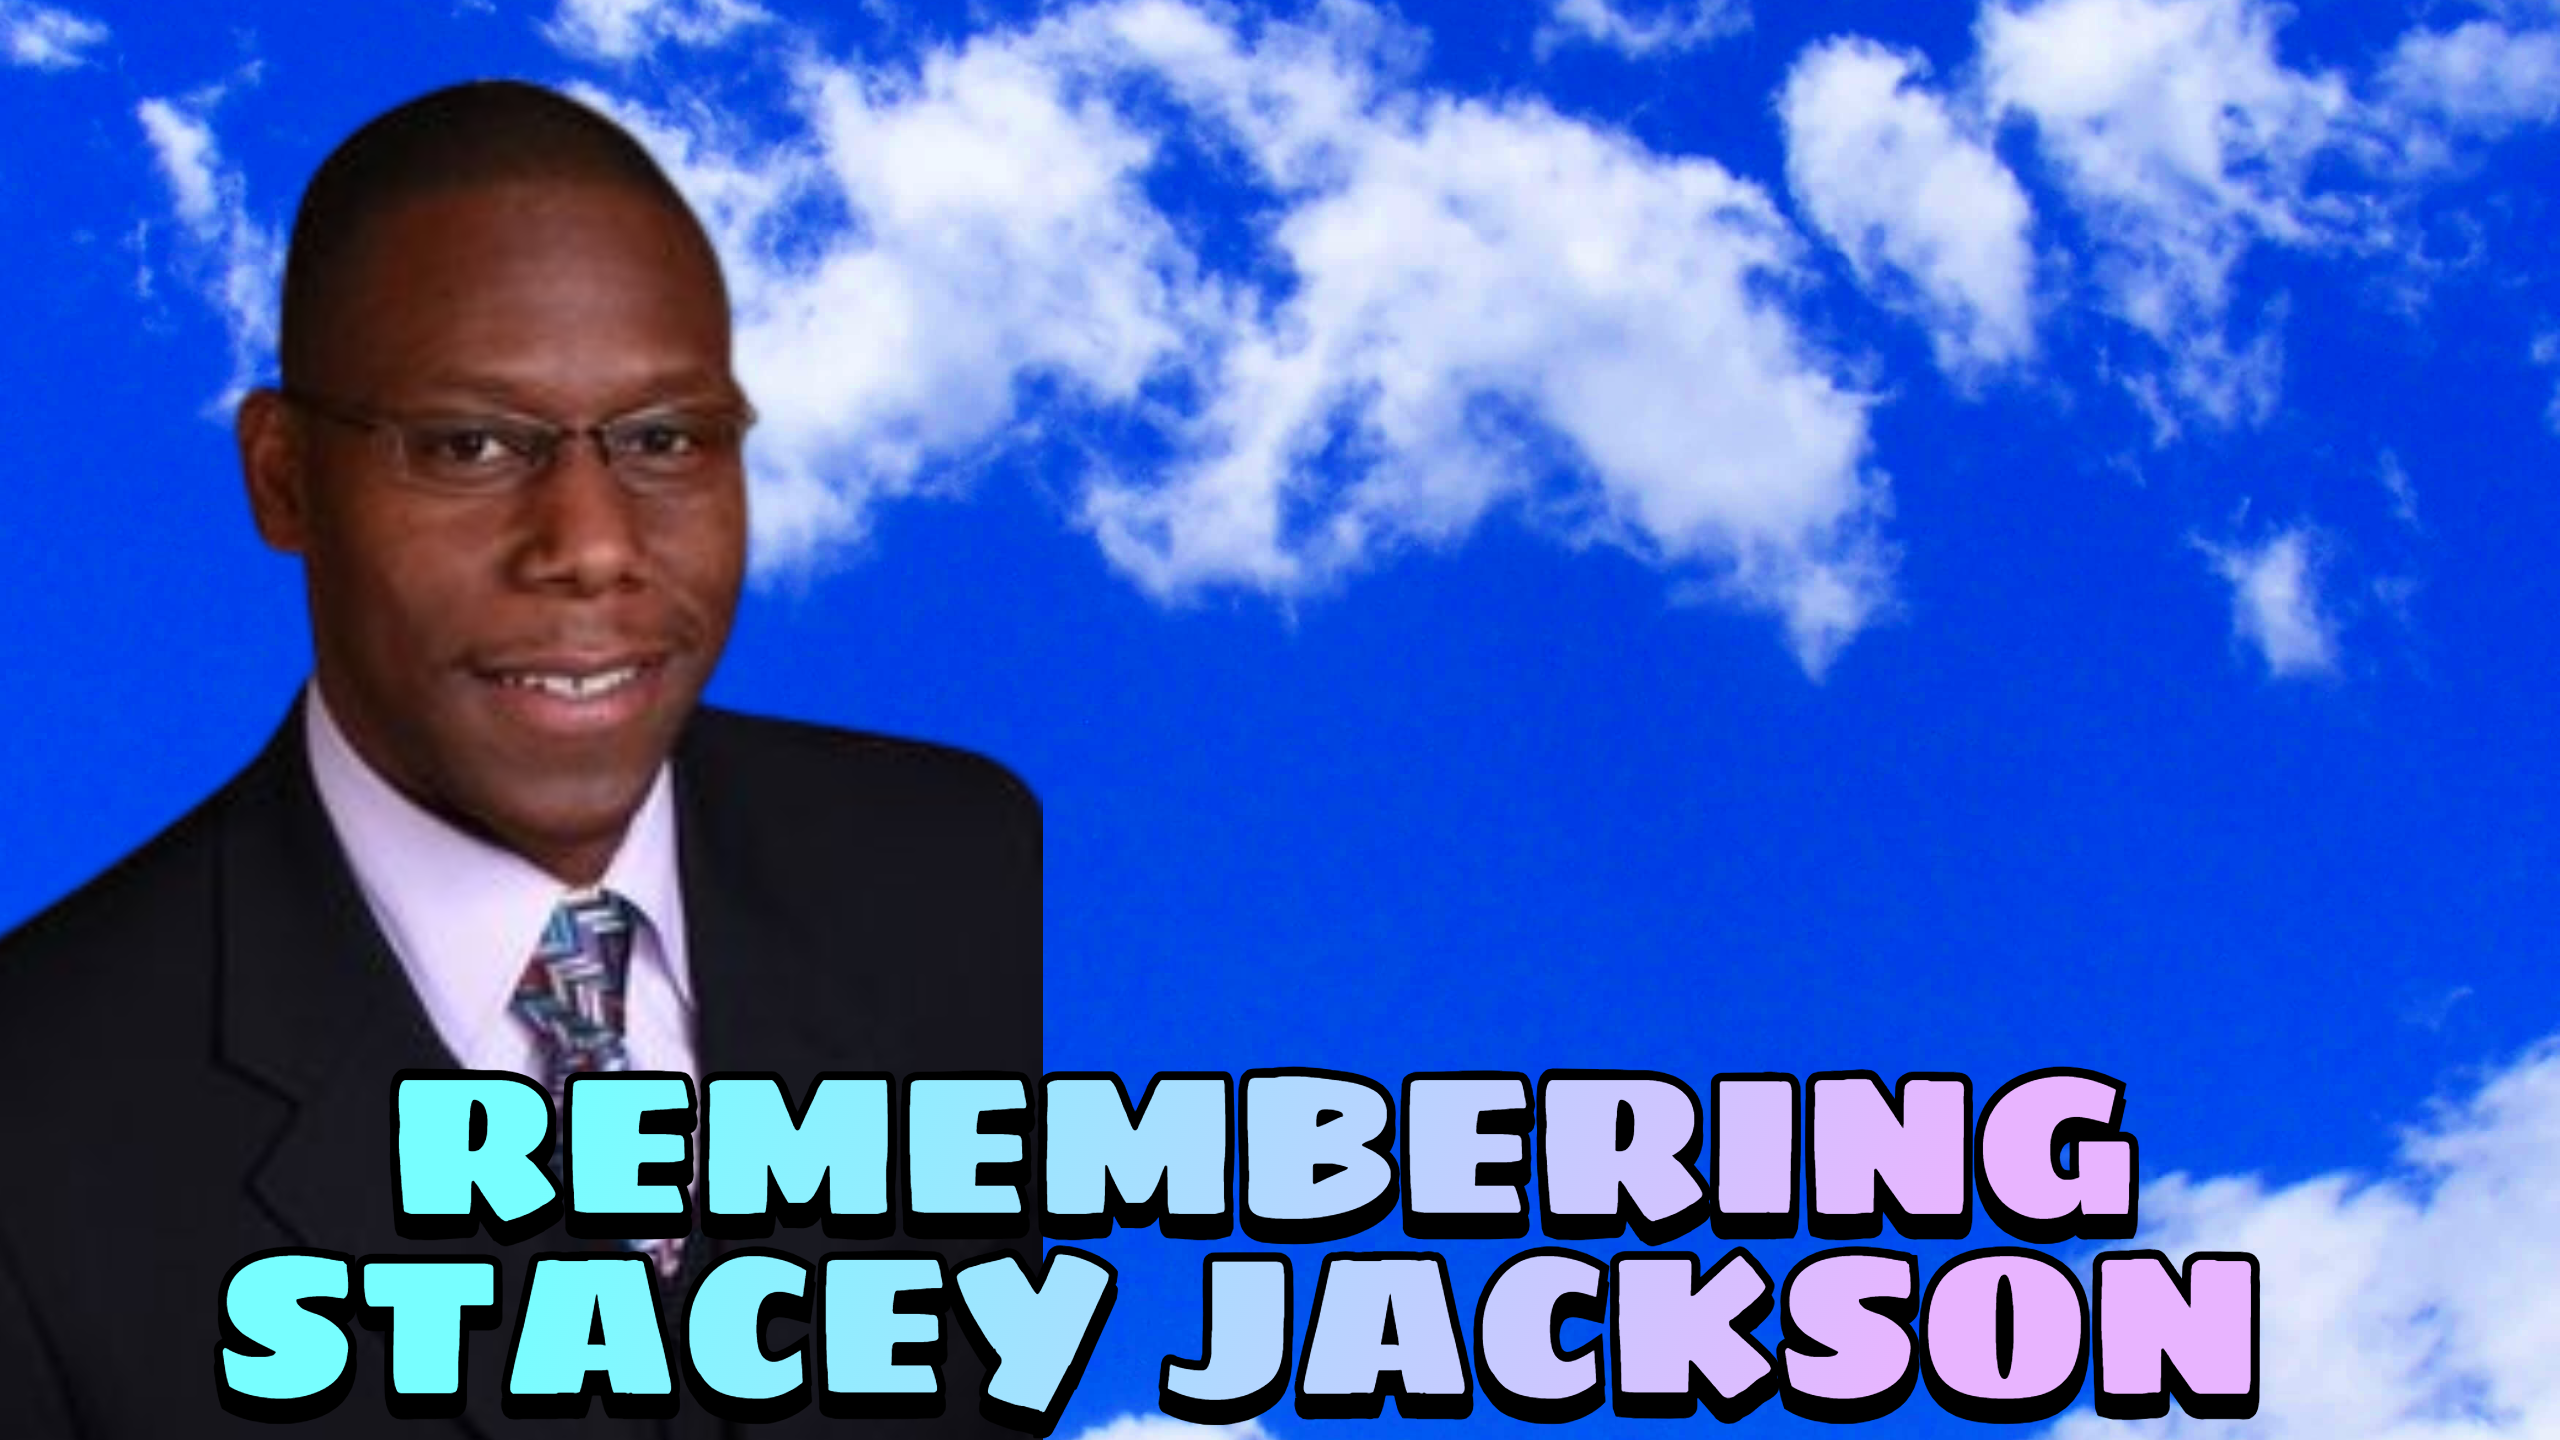 District Attorney Stacey Jackson Passes Sunday